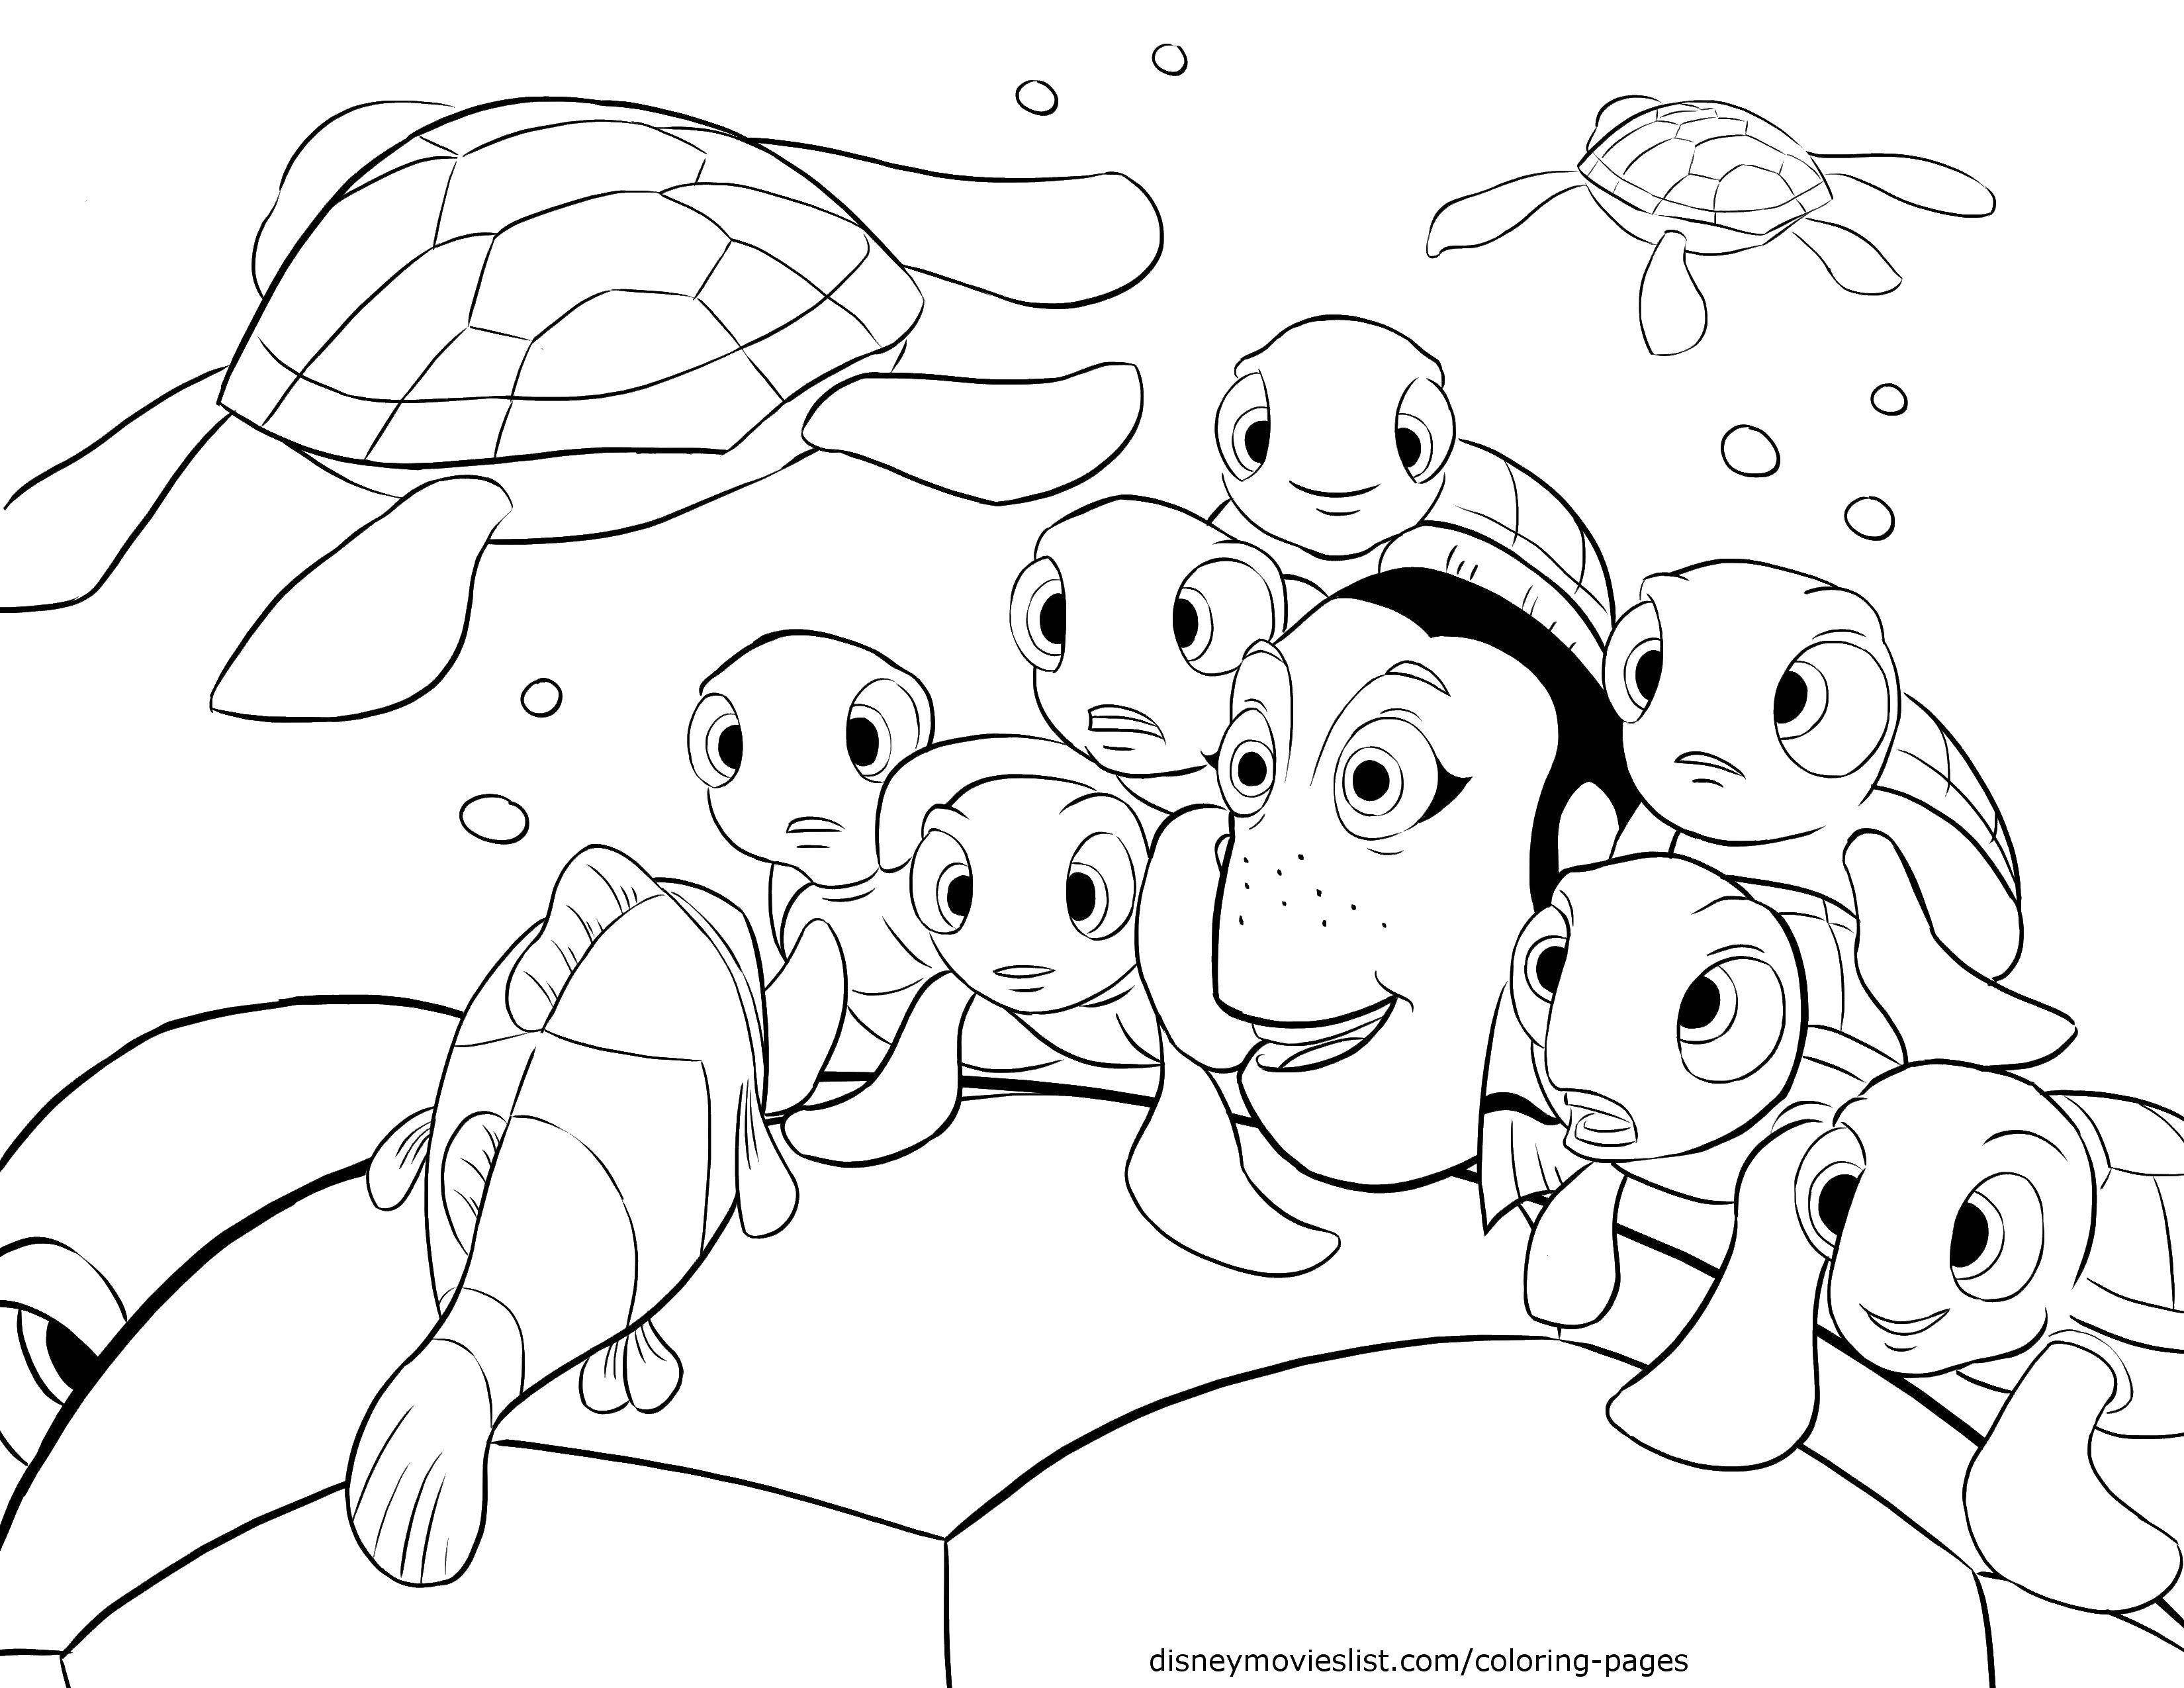 Coloring Cartoon finding Nemo. Category coloring. Tags:  in finding Nemo, Nemo, fish.